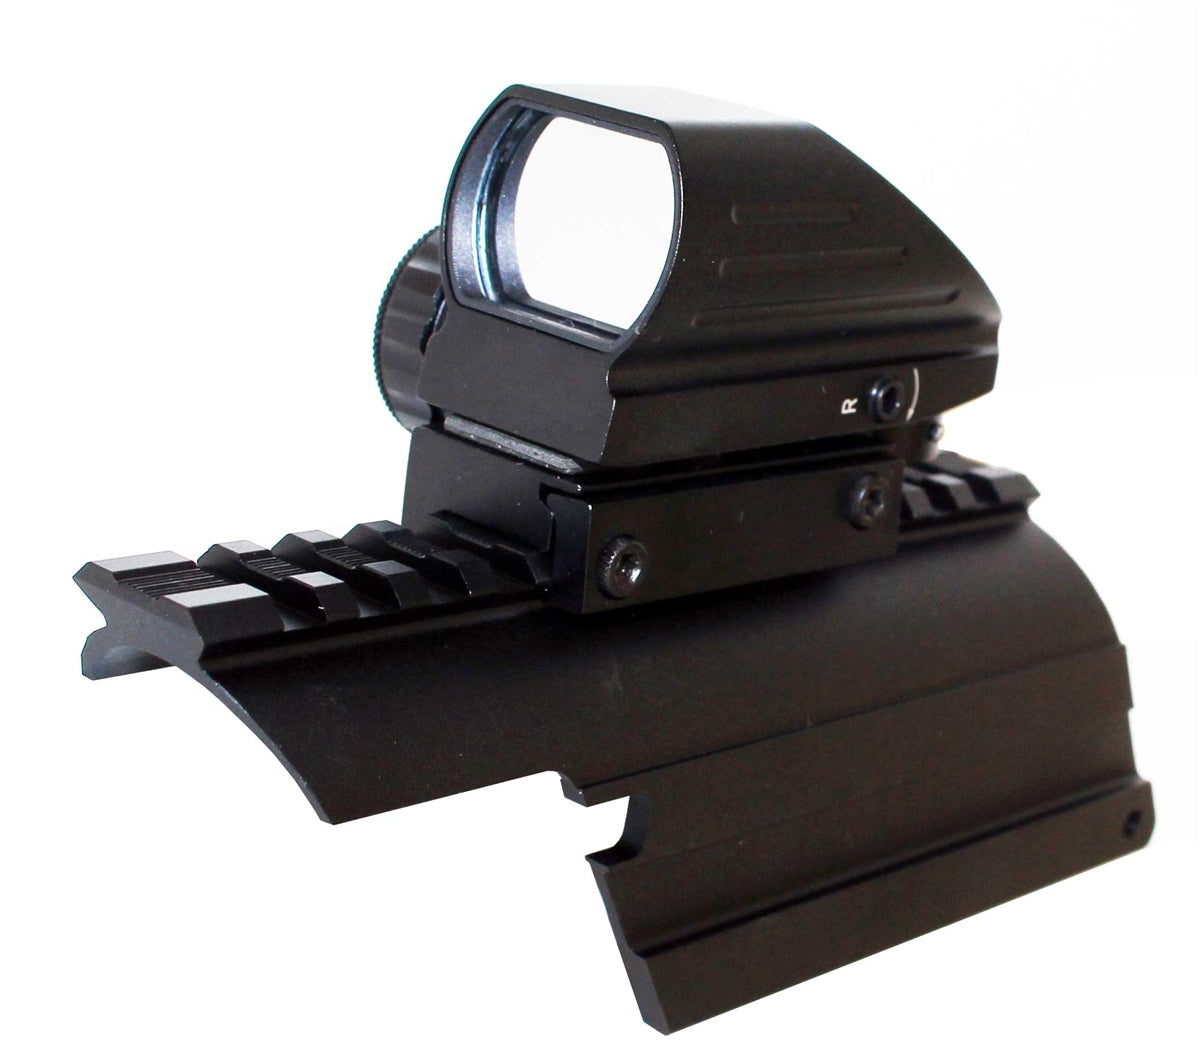 Trinity Reflex Sight Red Green Reticles With Saddle Mount Picatinny Rail Adapter Compatible With Mossberg 590 12 Gauge.